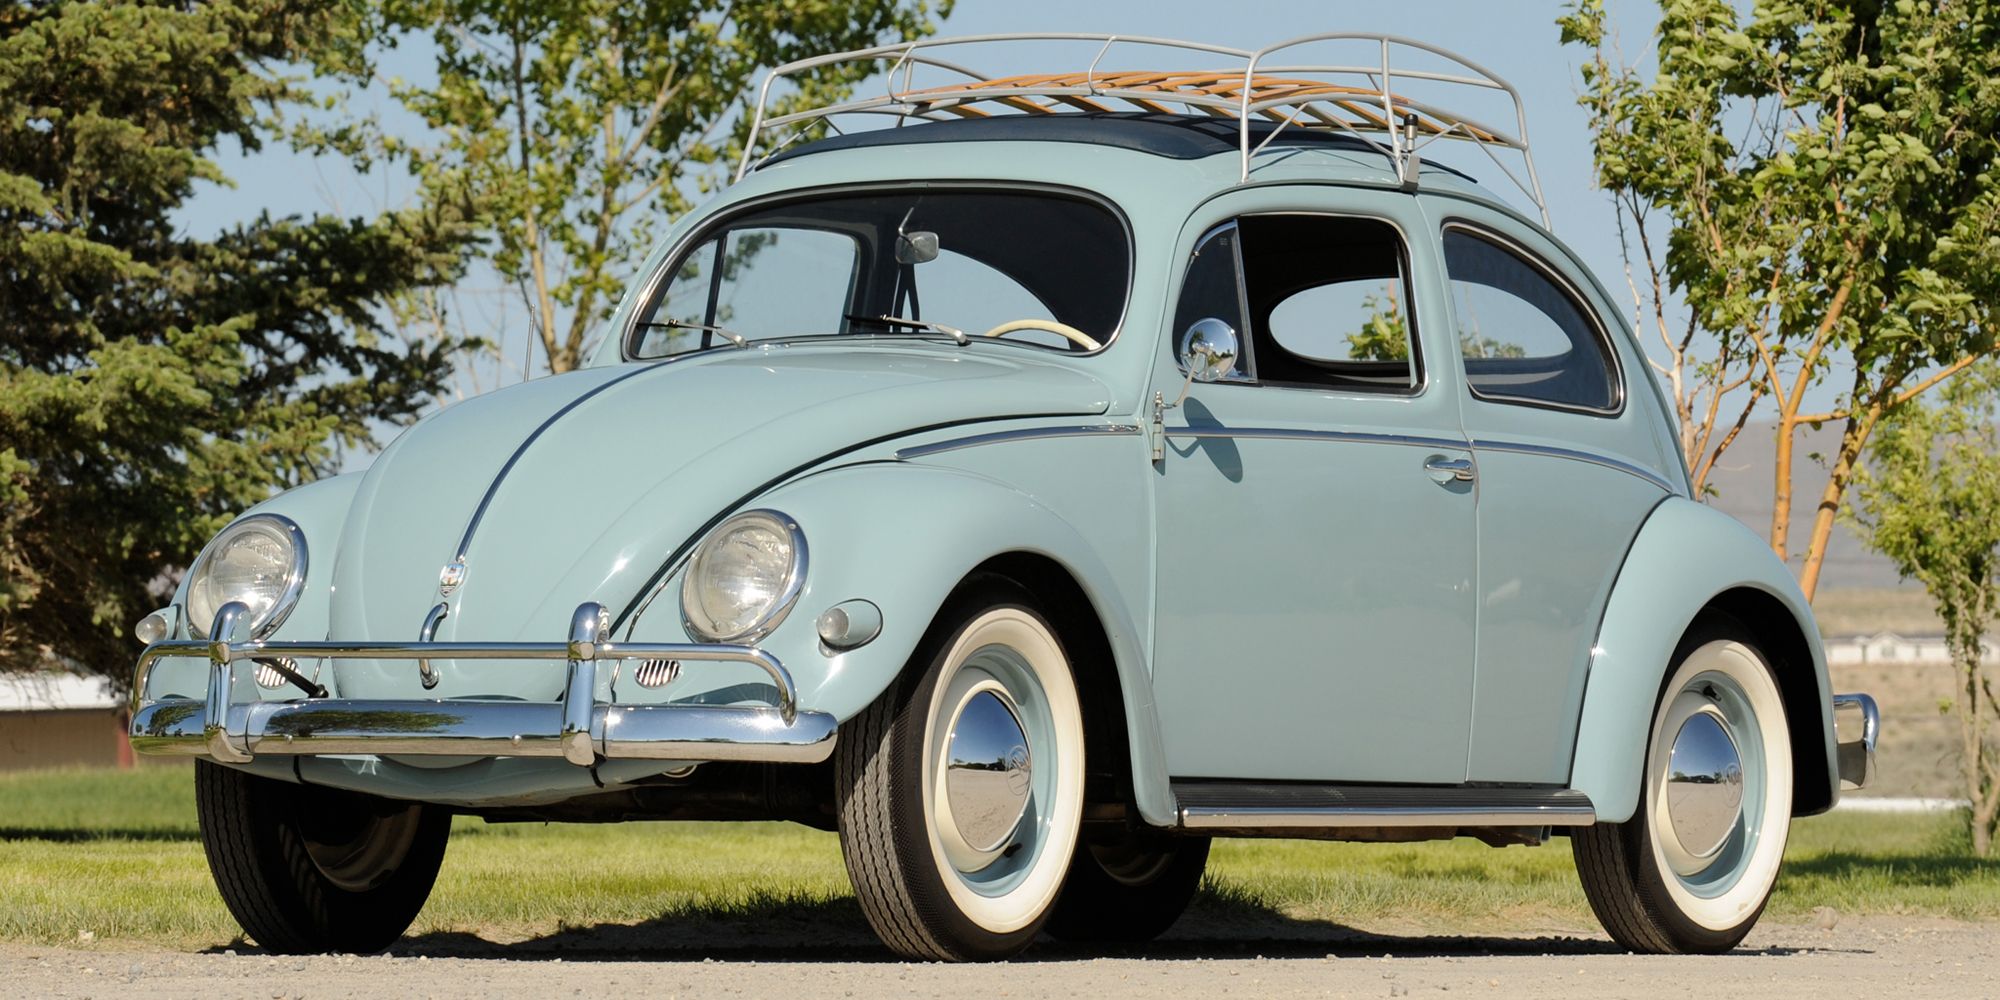 The front of a 1953 VW Beetle